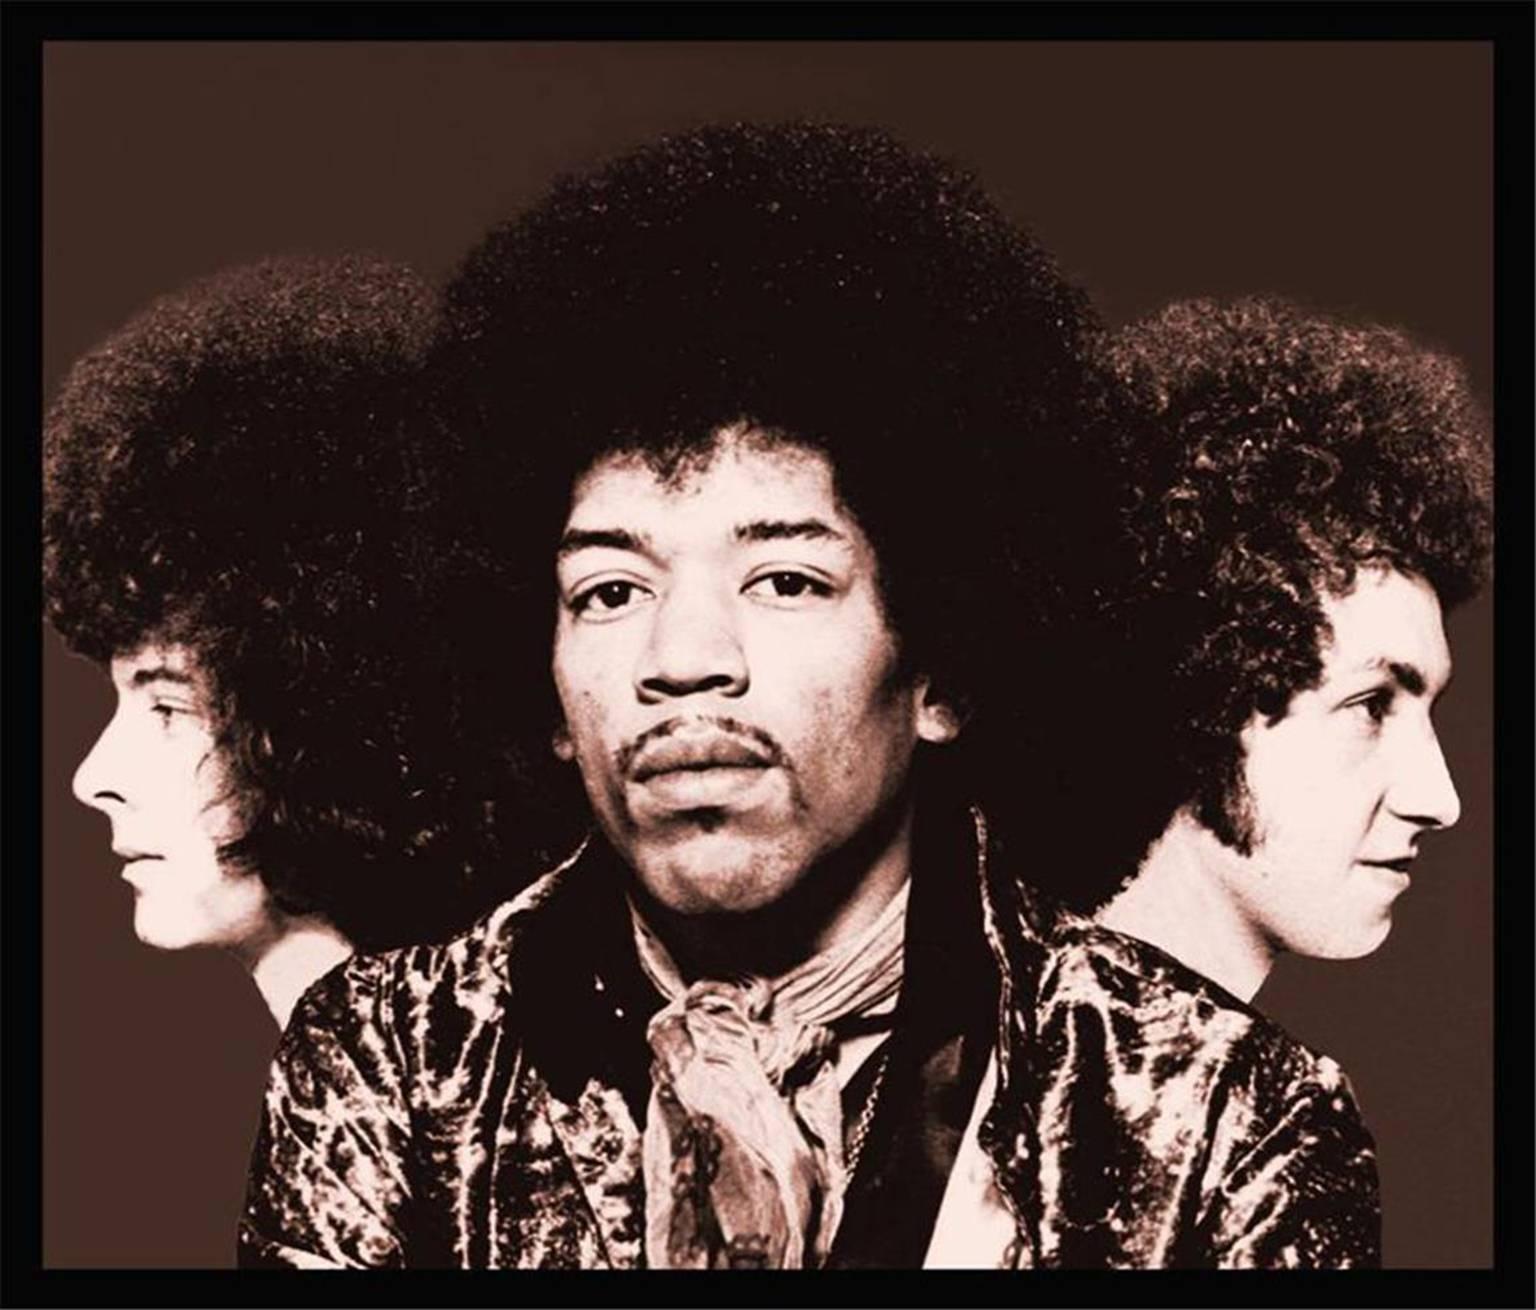 Karl Ferris Abstract Photograph - The Jimi Hendrix Experience, "Axis: Bold As Love" 